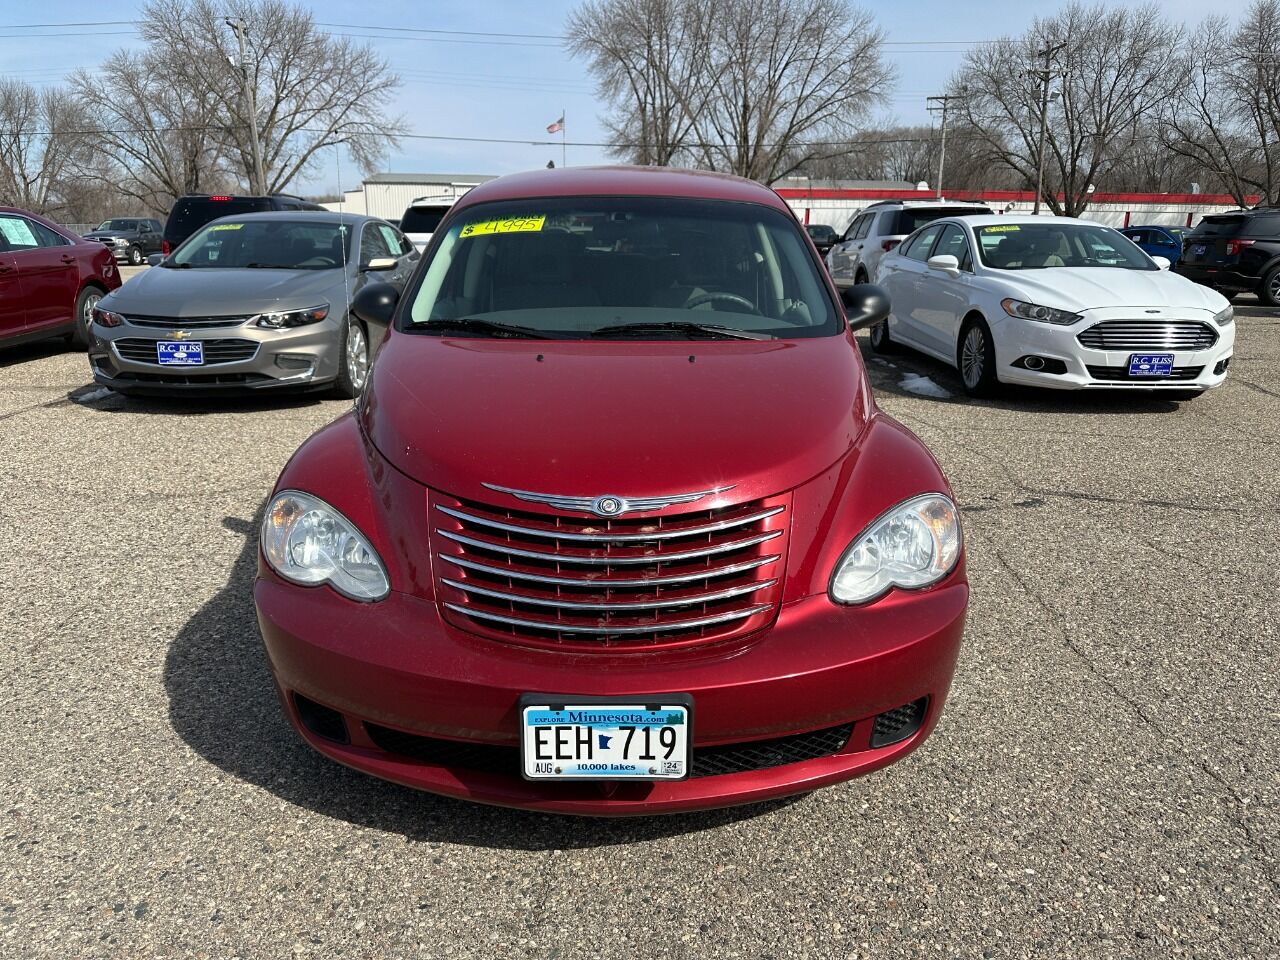 Used 2007 Chrysler PT Cruiser Touring Edition with VIN 3A4FY58B67T521527 for sale in Faribault, Minnesota